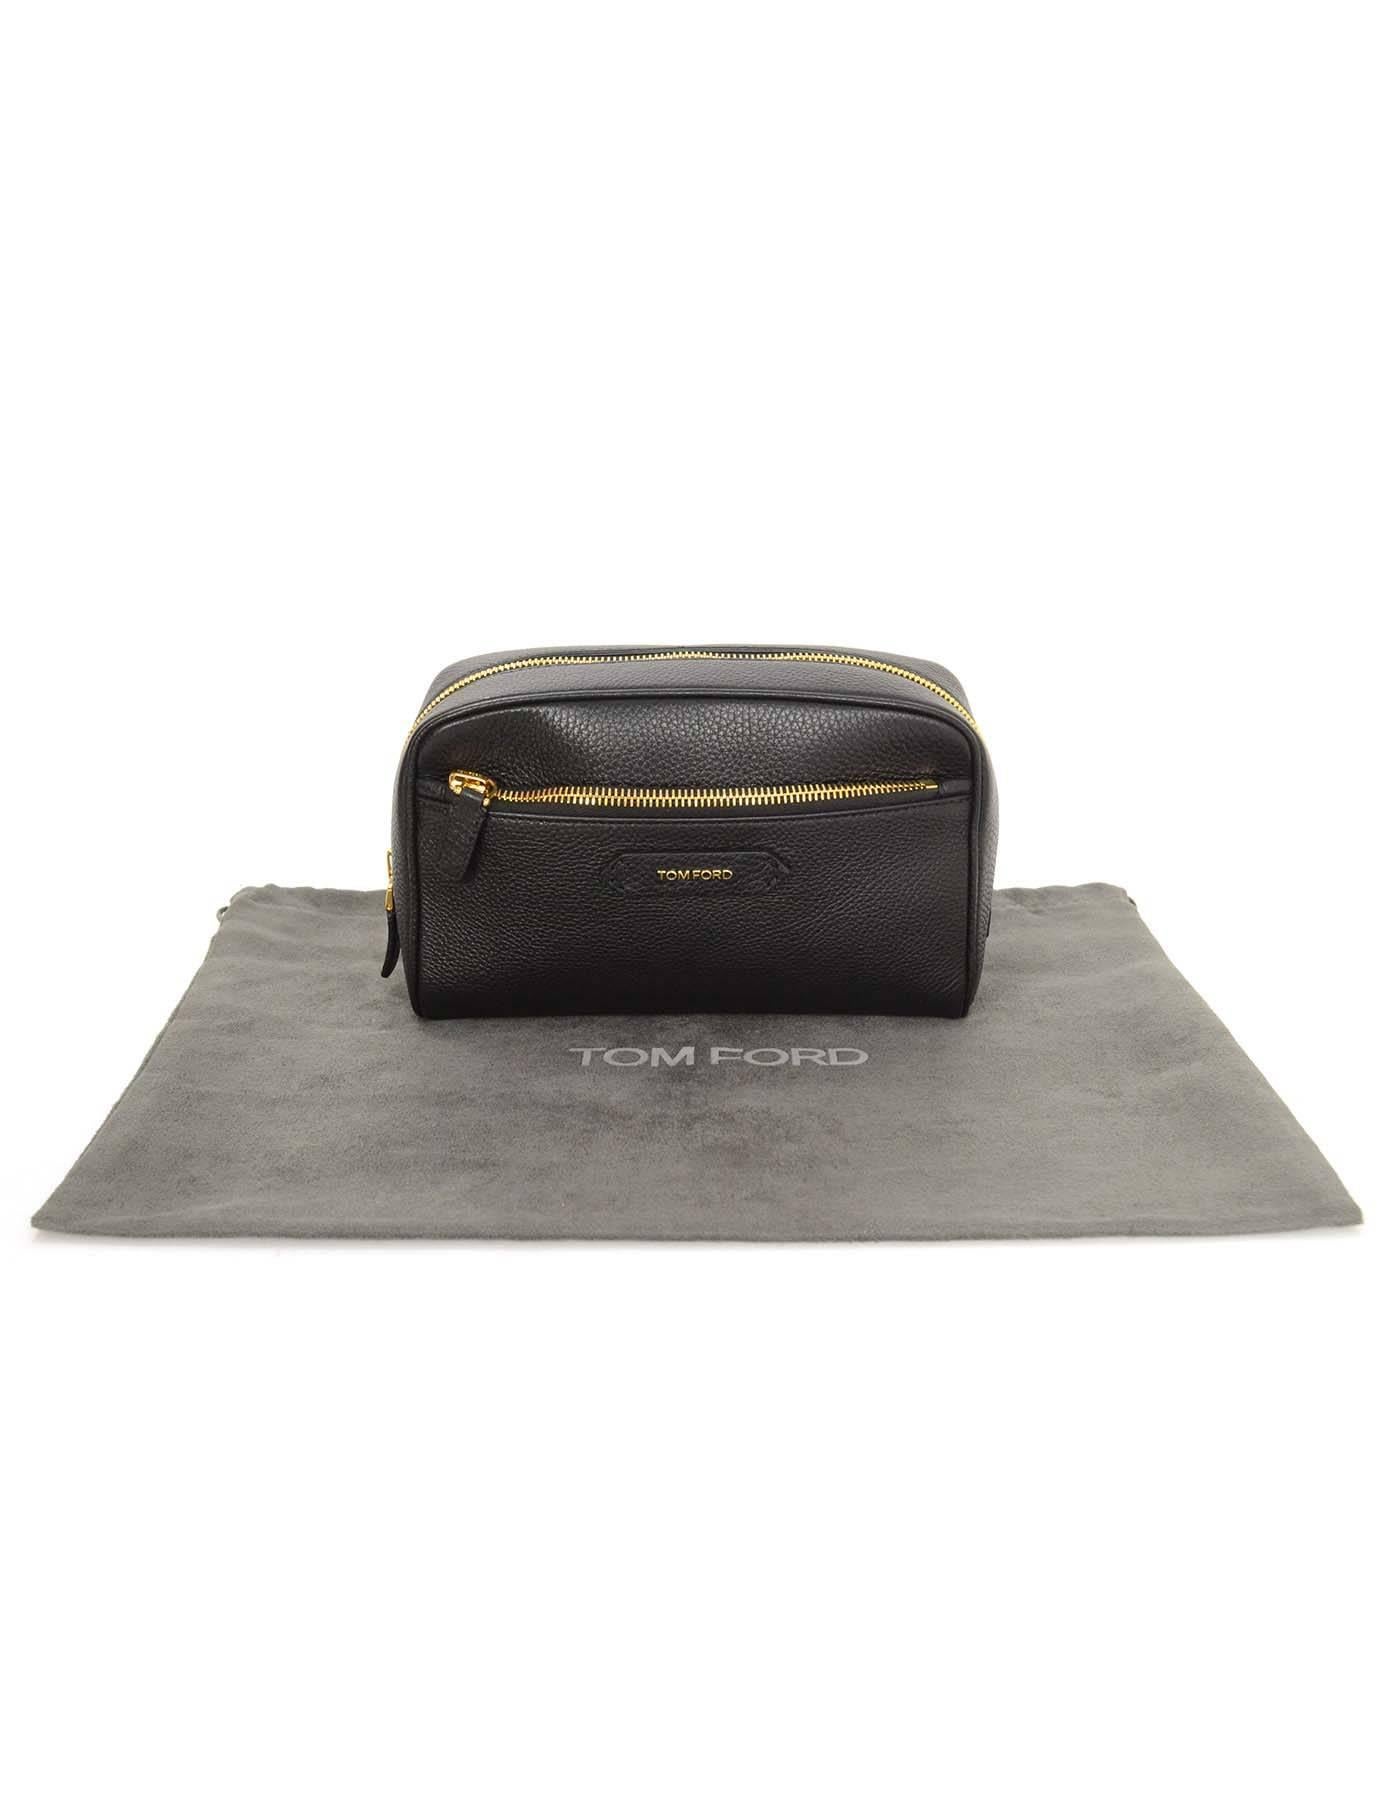 Tom Ford Black Leather Toiletry Bag GHW 2